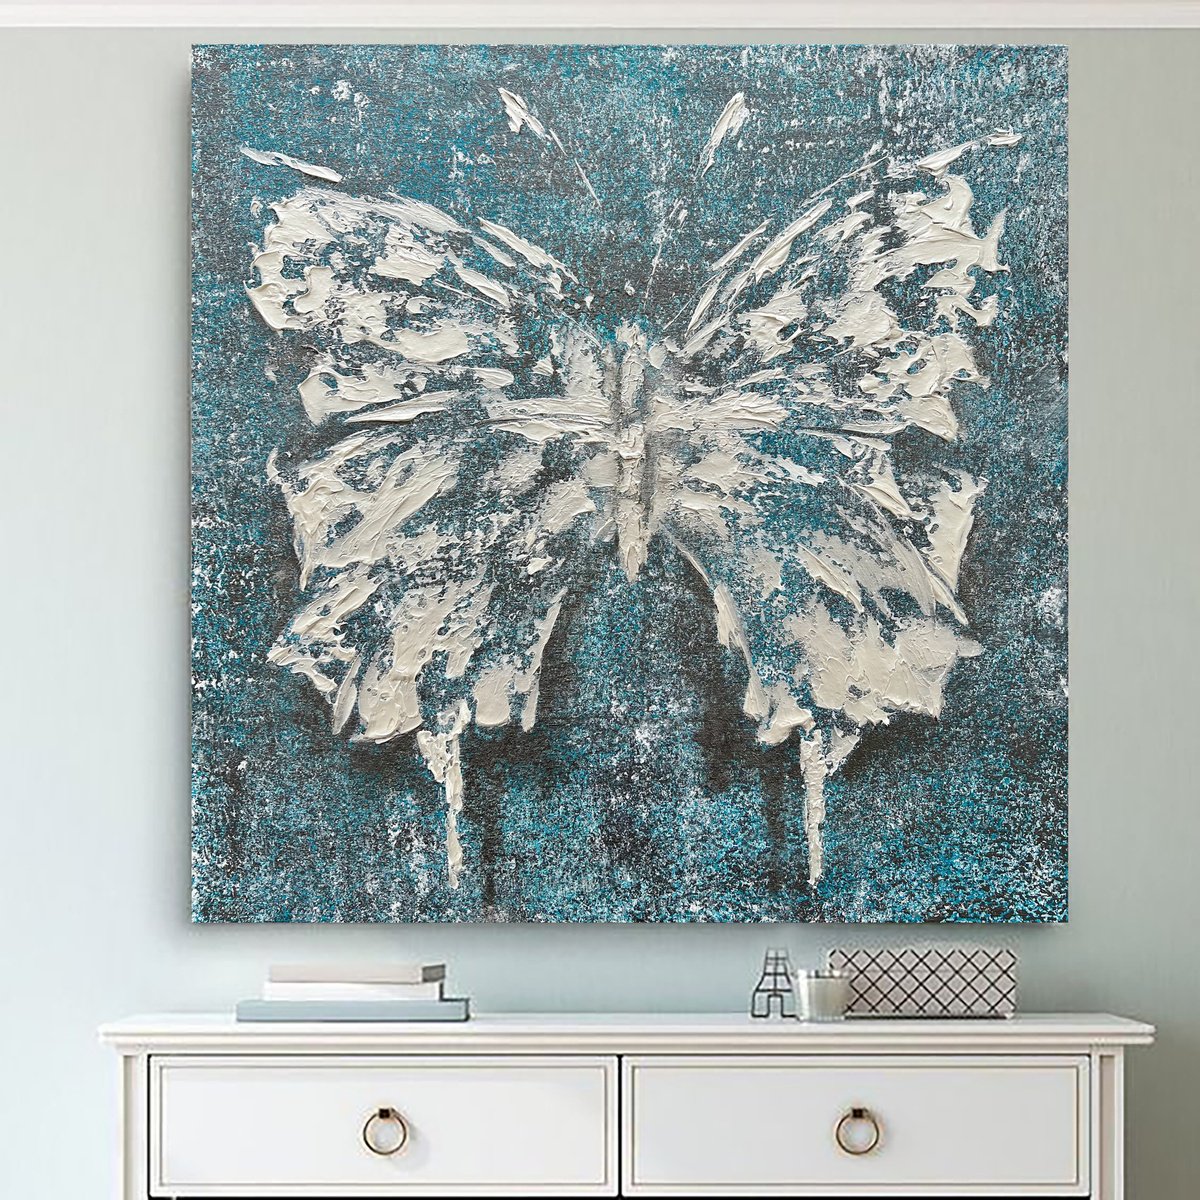 White and Turquoise abstraction. White Turquoise butterfly. by Marina Skromova